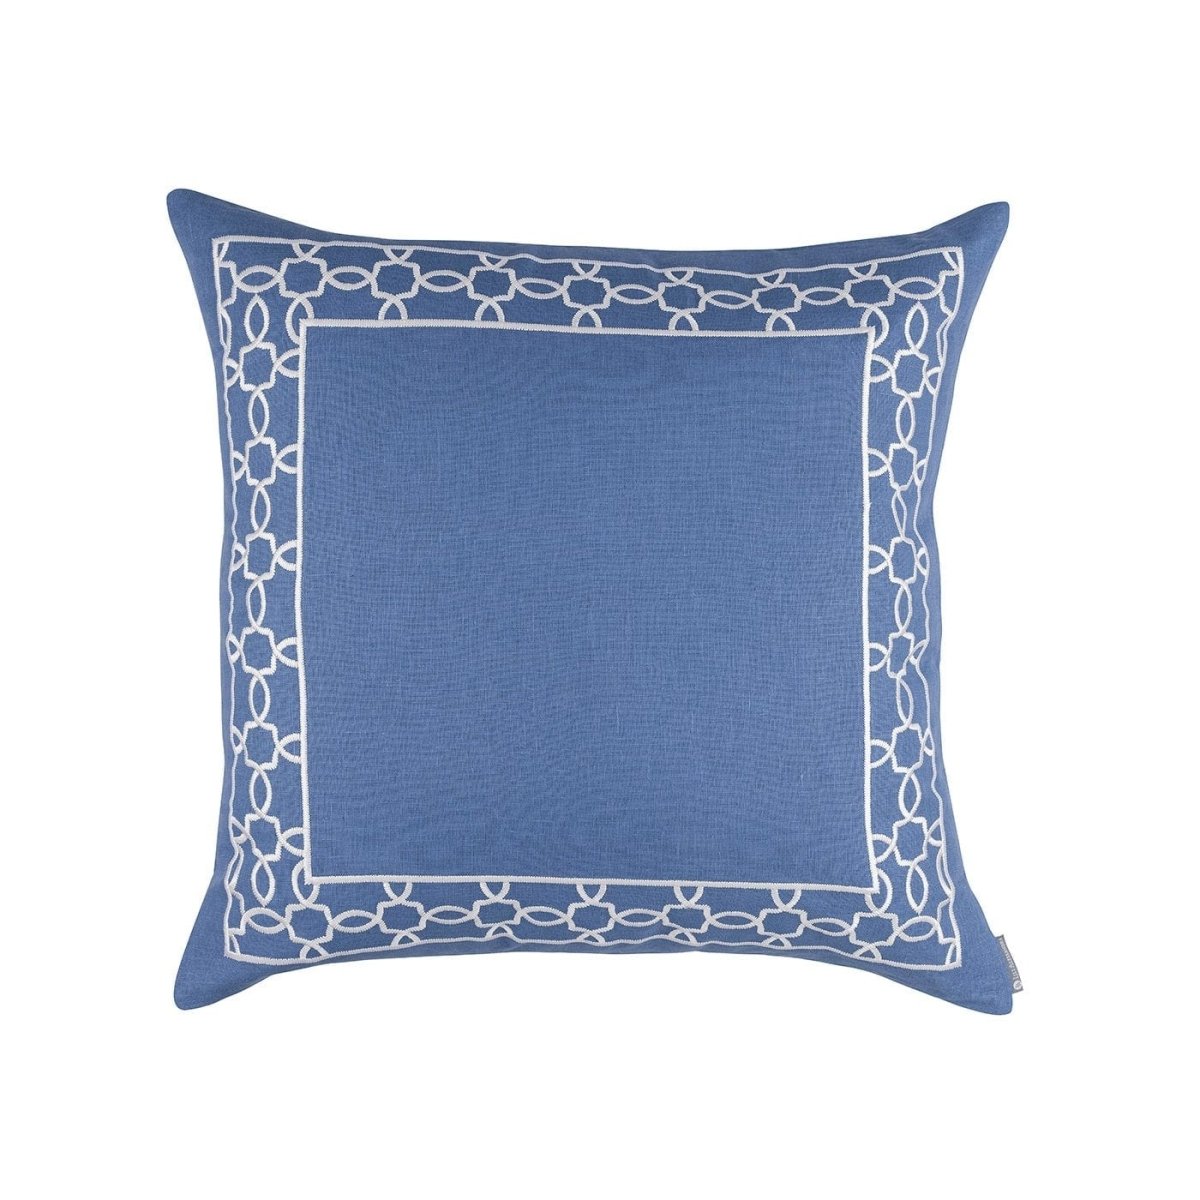 Lynx Azure & White Euro Pillow by Lili Alessandra | Fig Linens